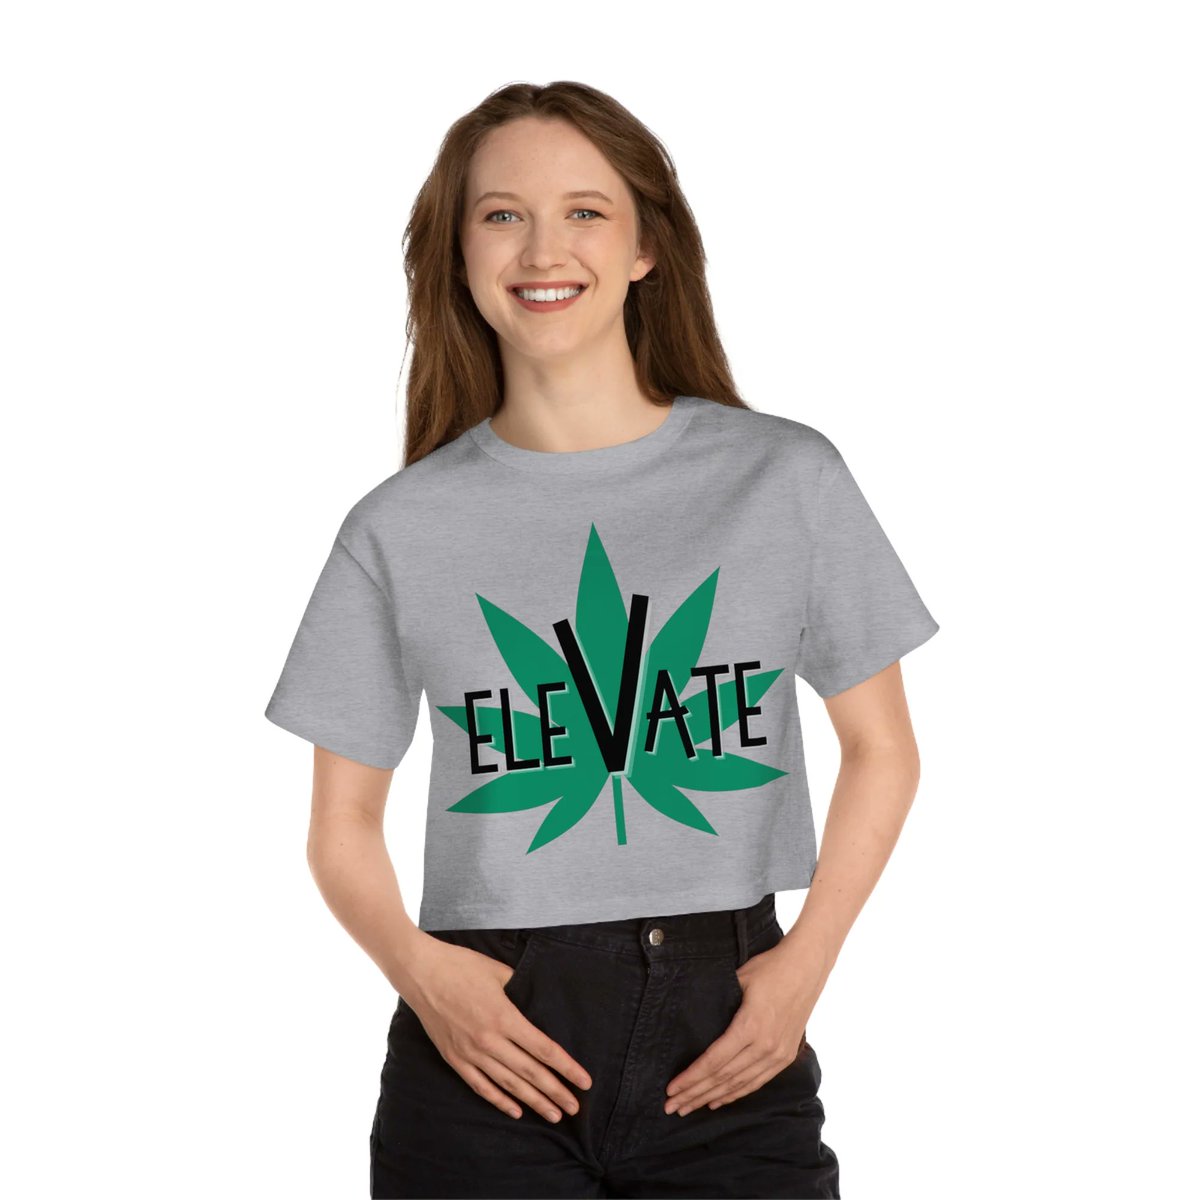 Ready to #Elevate with us on 420, #StonerFam? #420Merch

brainforest420.com Use code 420Free for FREE SHIPPING all month. Celebrate with us!✨🍃